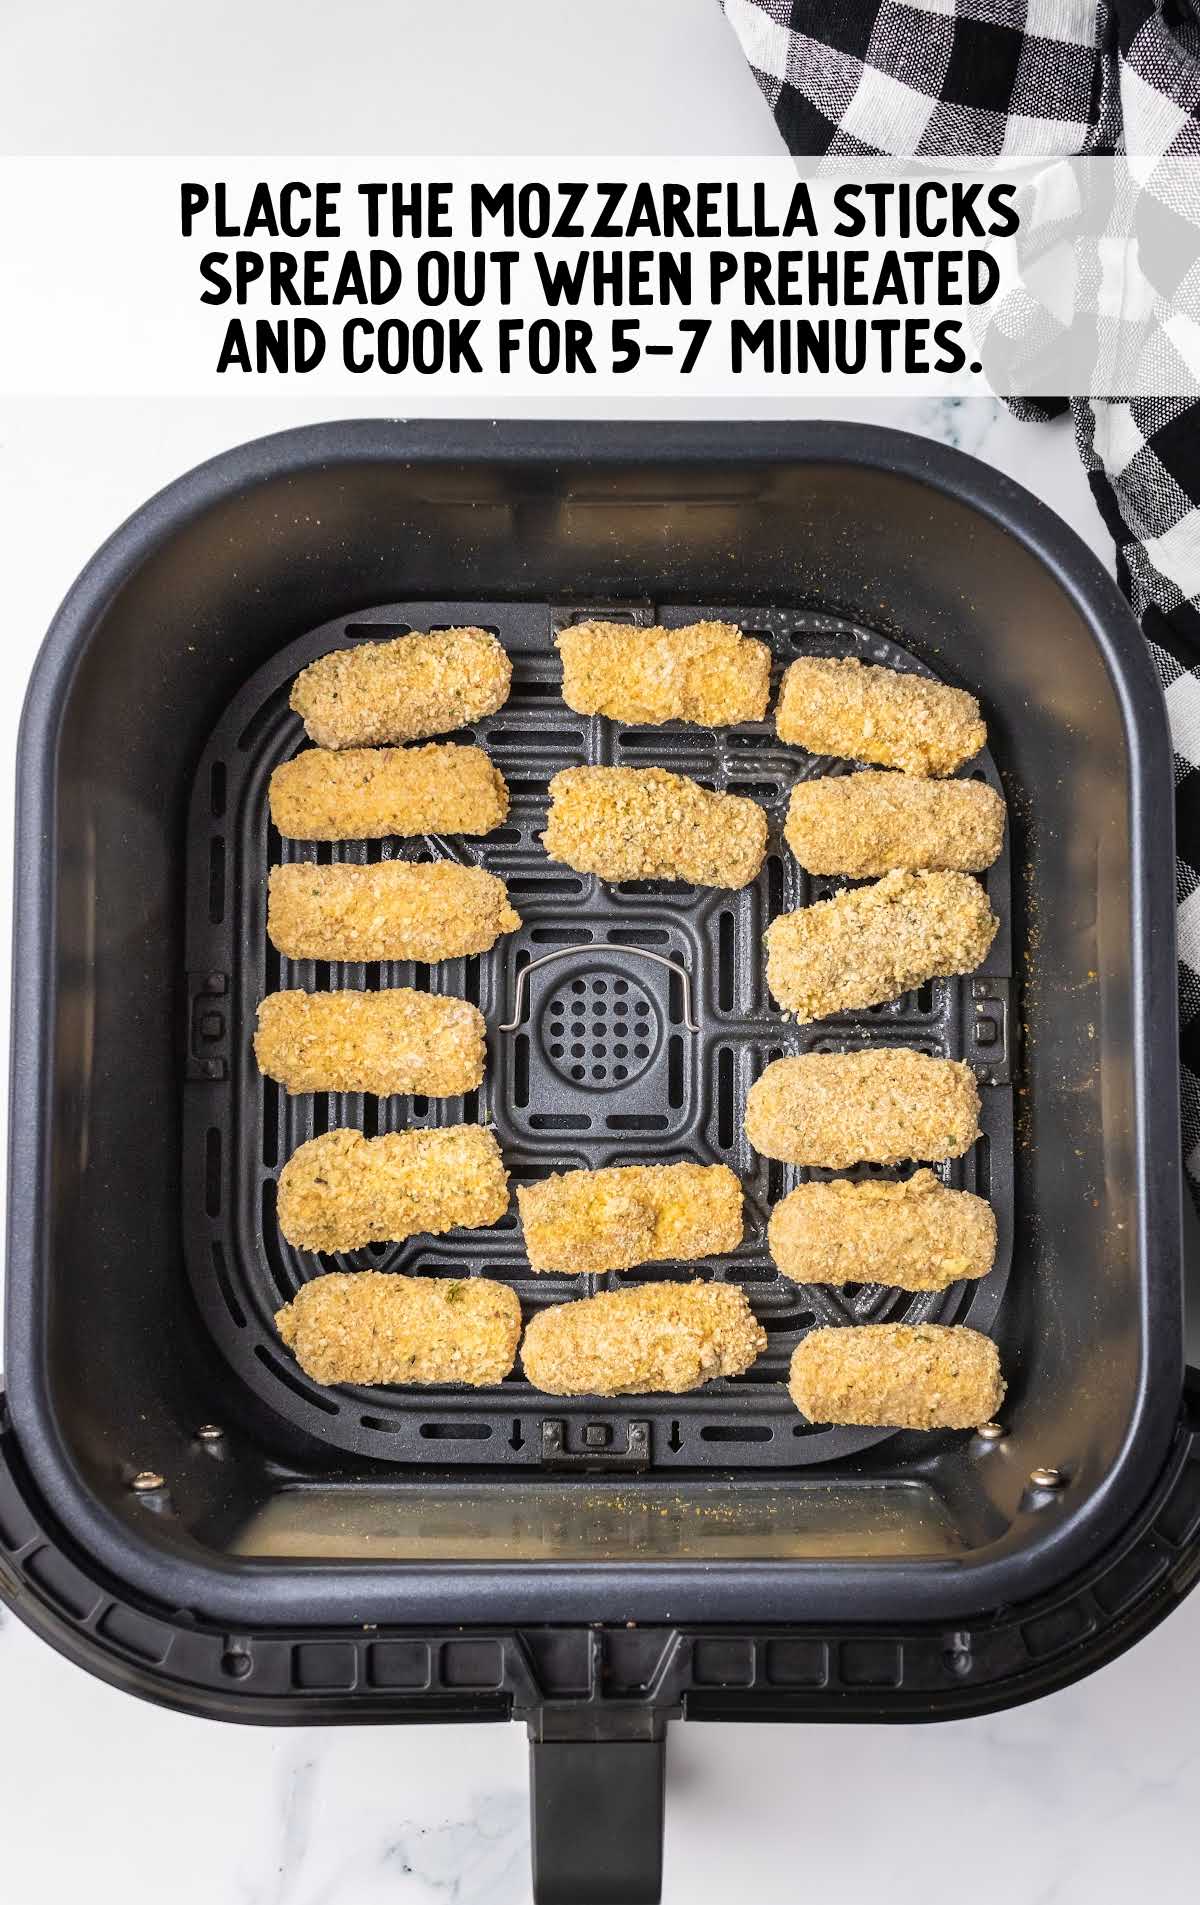 Mozzarella sticks spread out on the air fryer and cooked